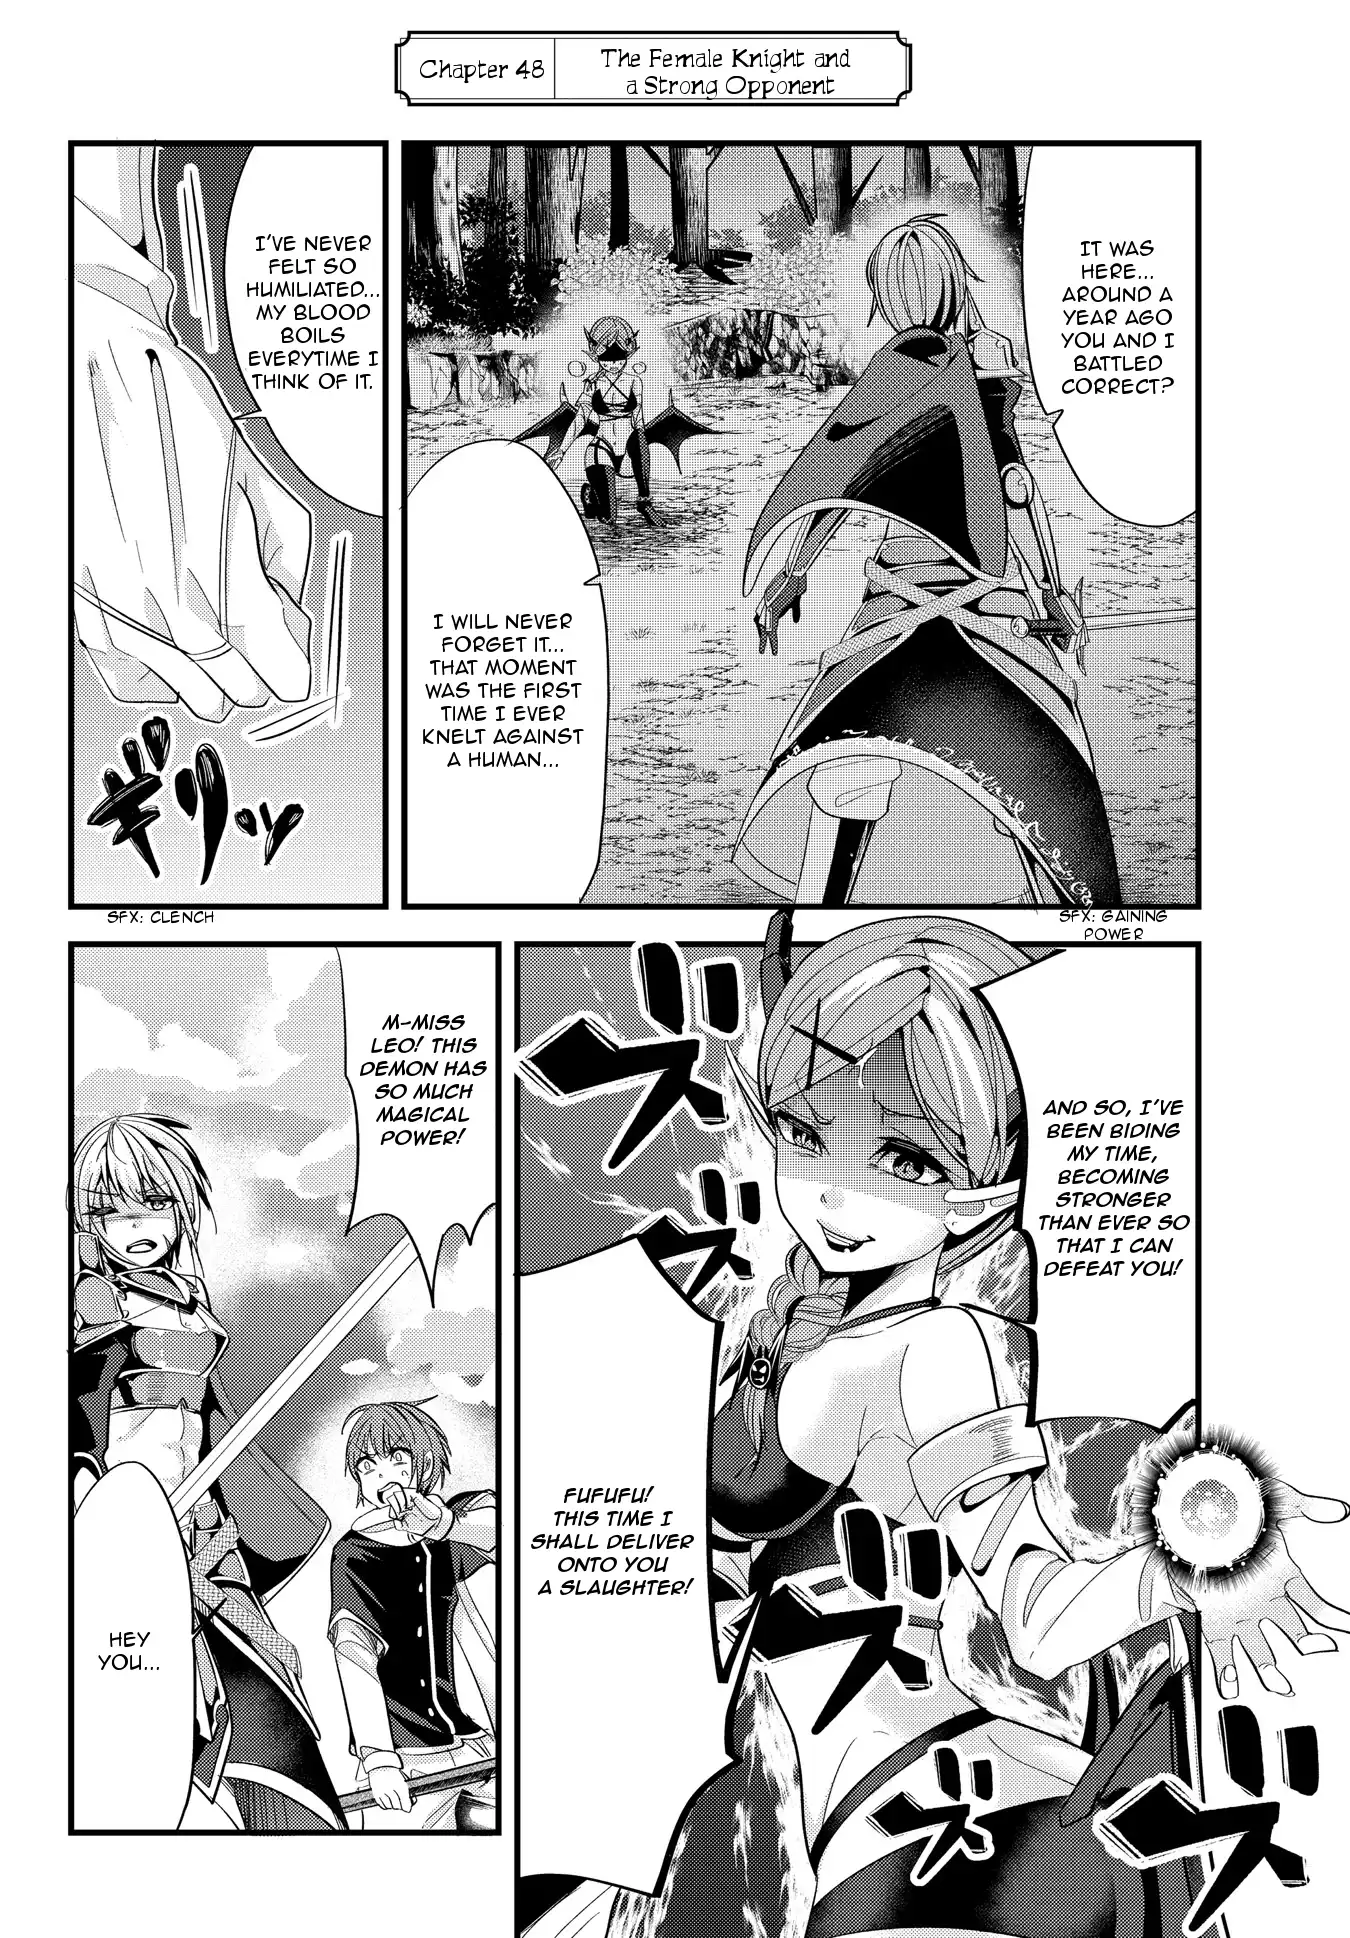 A Story About Treating a Female Knight, Who Has Never Been Treated as a Woman, as a Woman - Chapter 48 Page 2